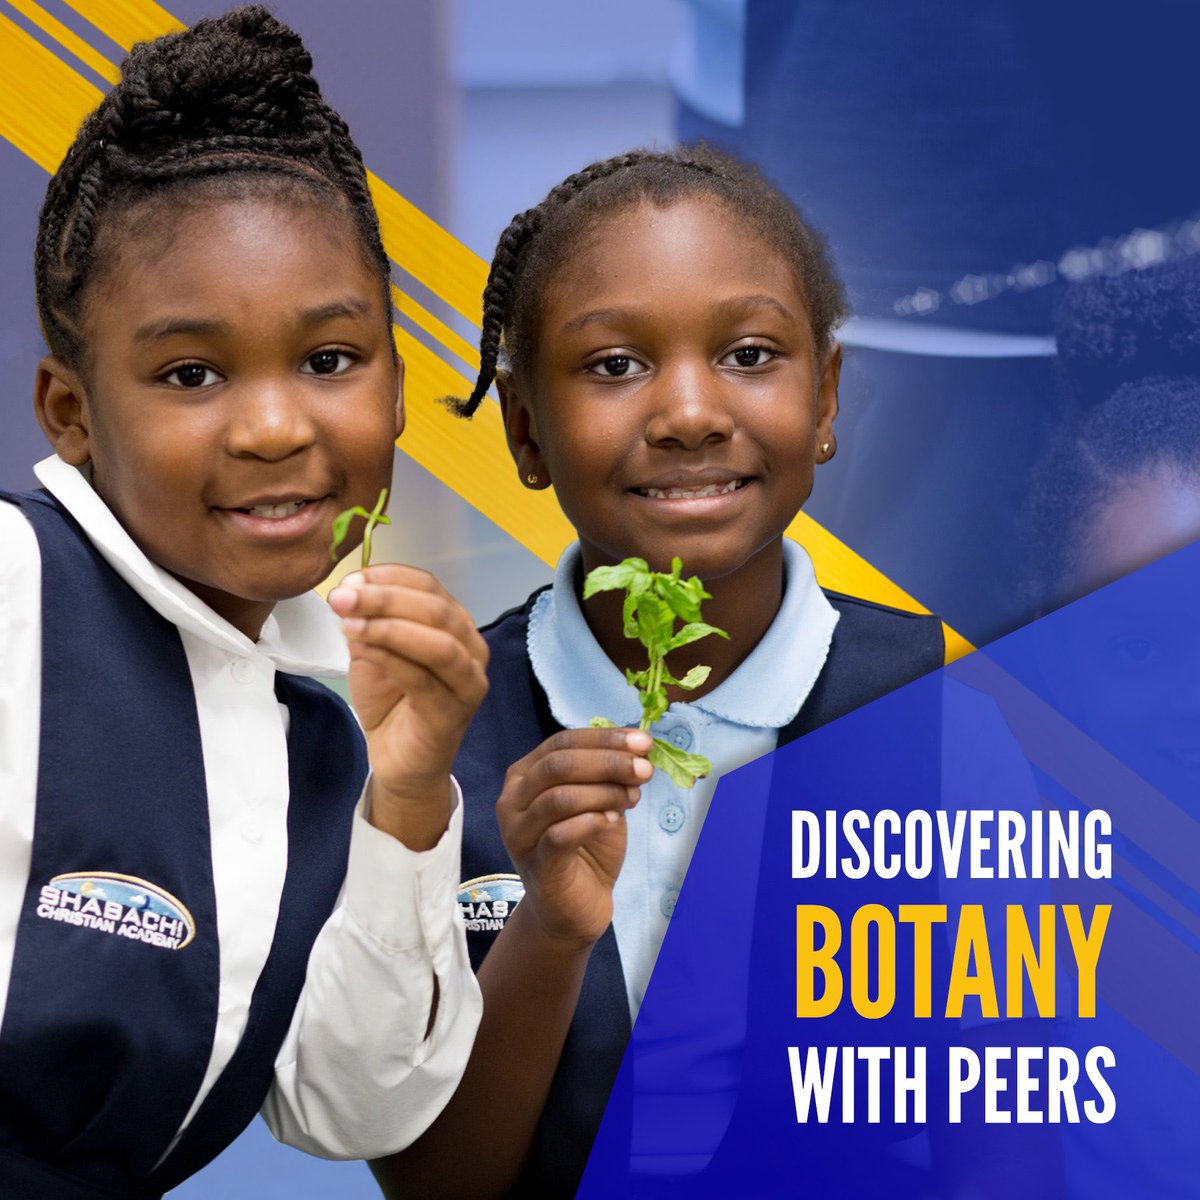 Friendship, botany, learning… oh my!!